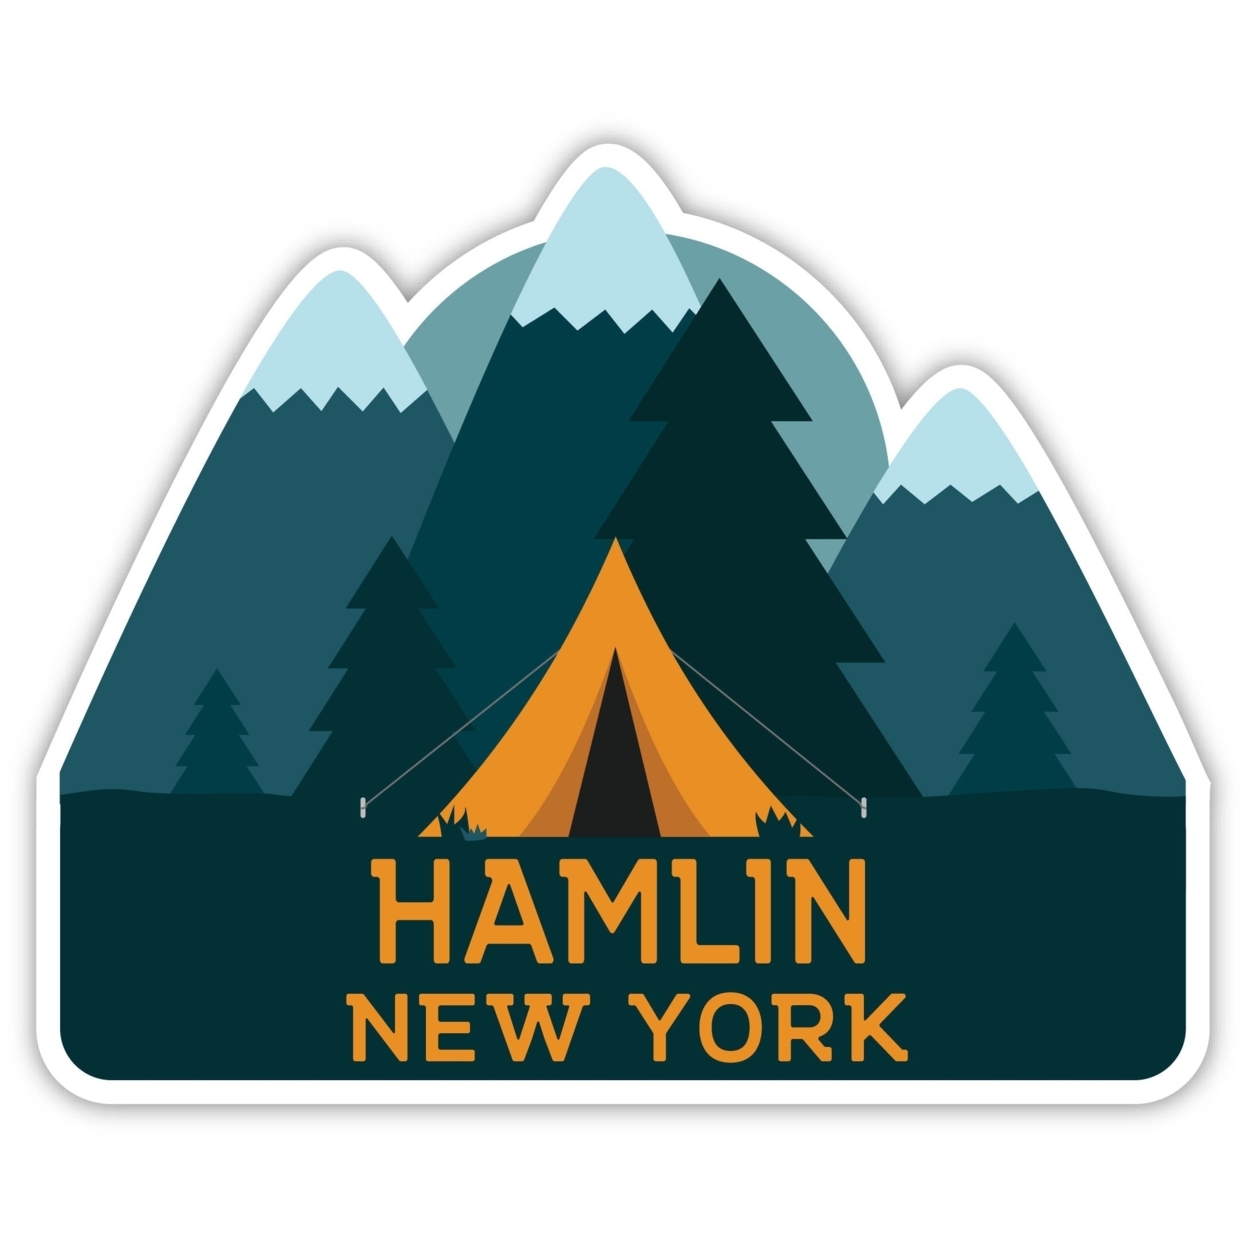 Hamlin New York Souvenir Decorative Stickers (Choose Theme And Size) - 4-Pack, 12-Inch, Tent